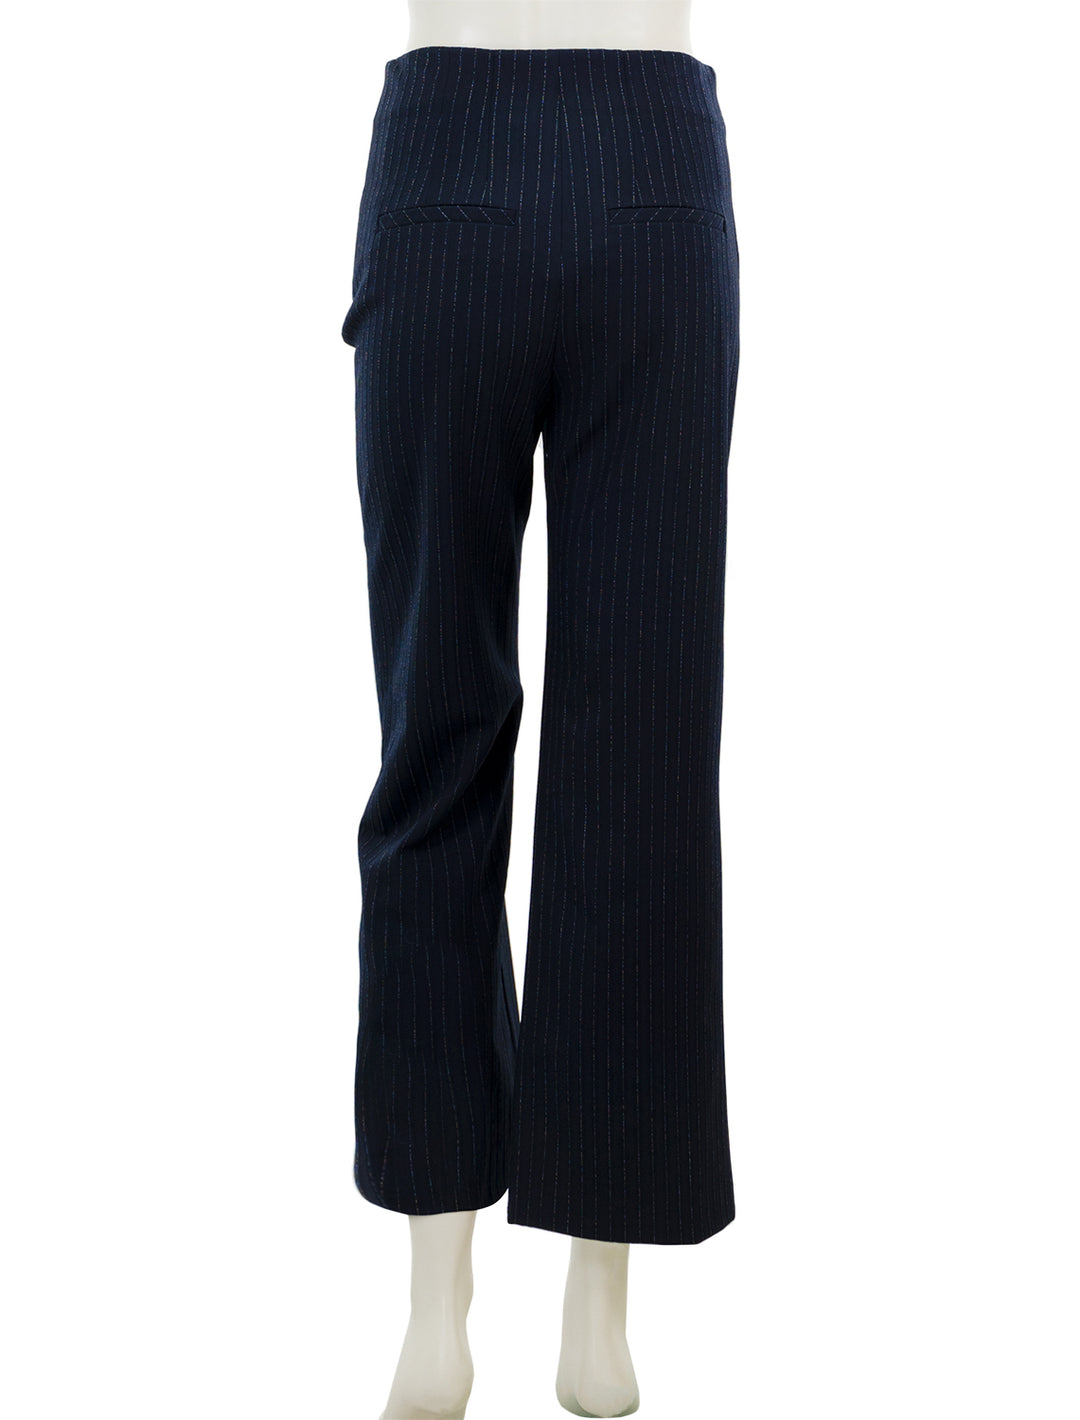 Back view of Veronica Beard's dova pant in navy pinstripe.